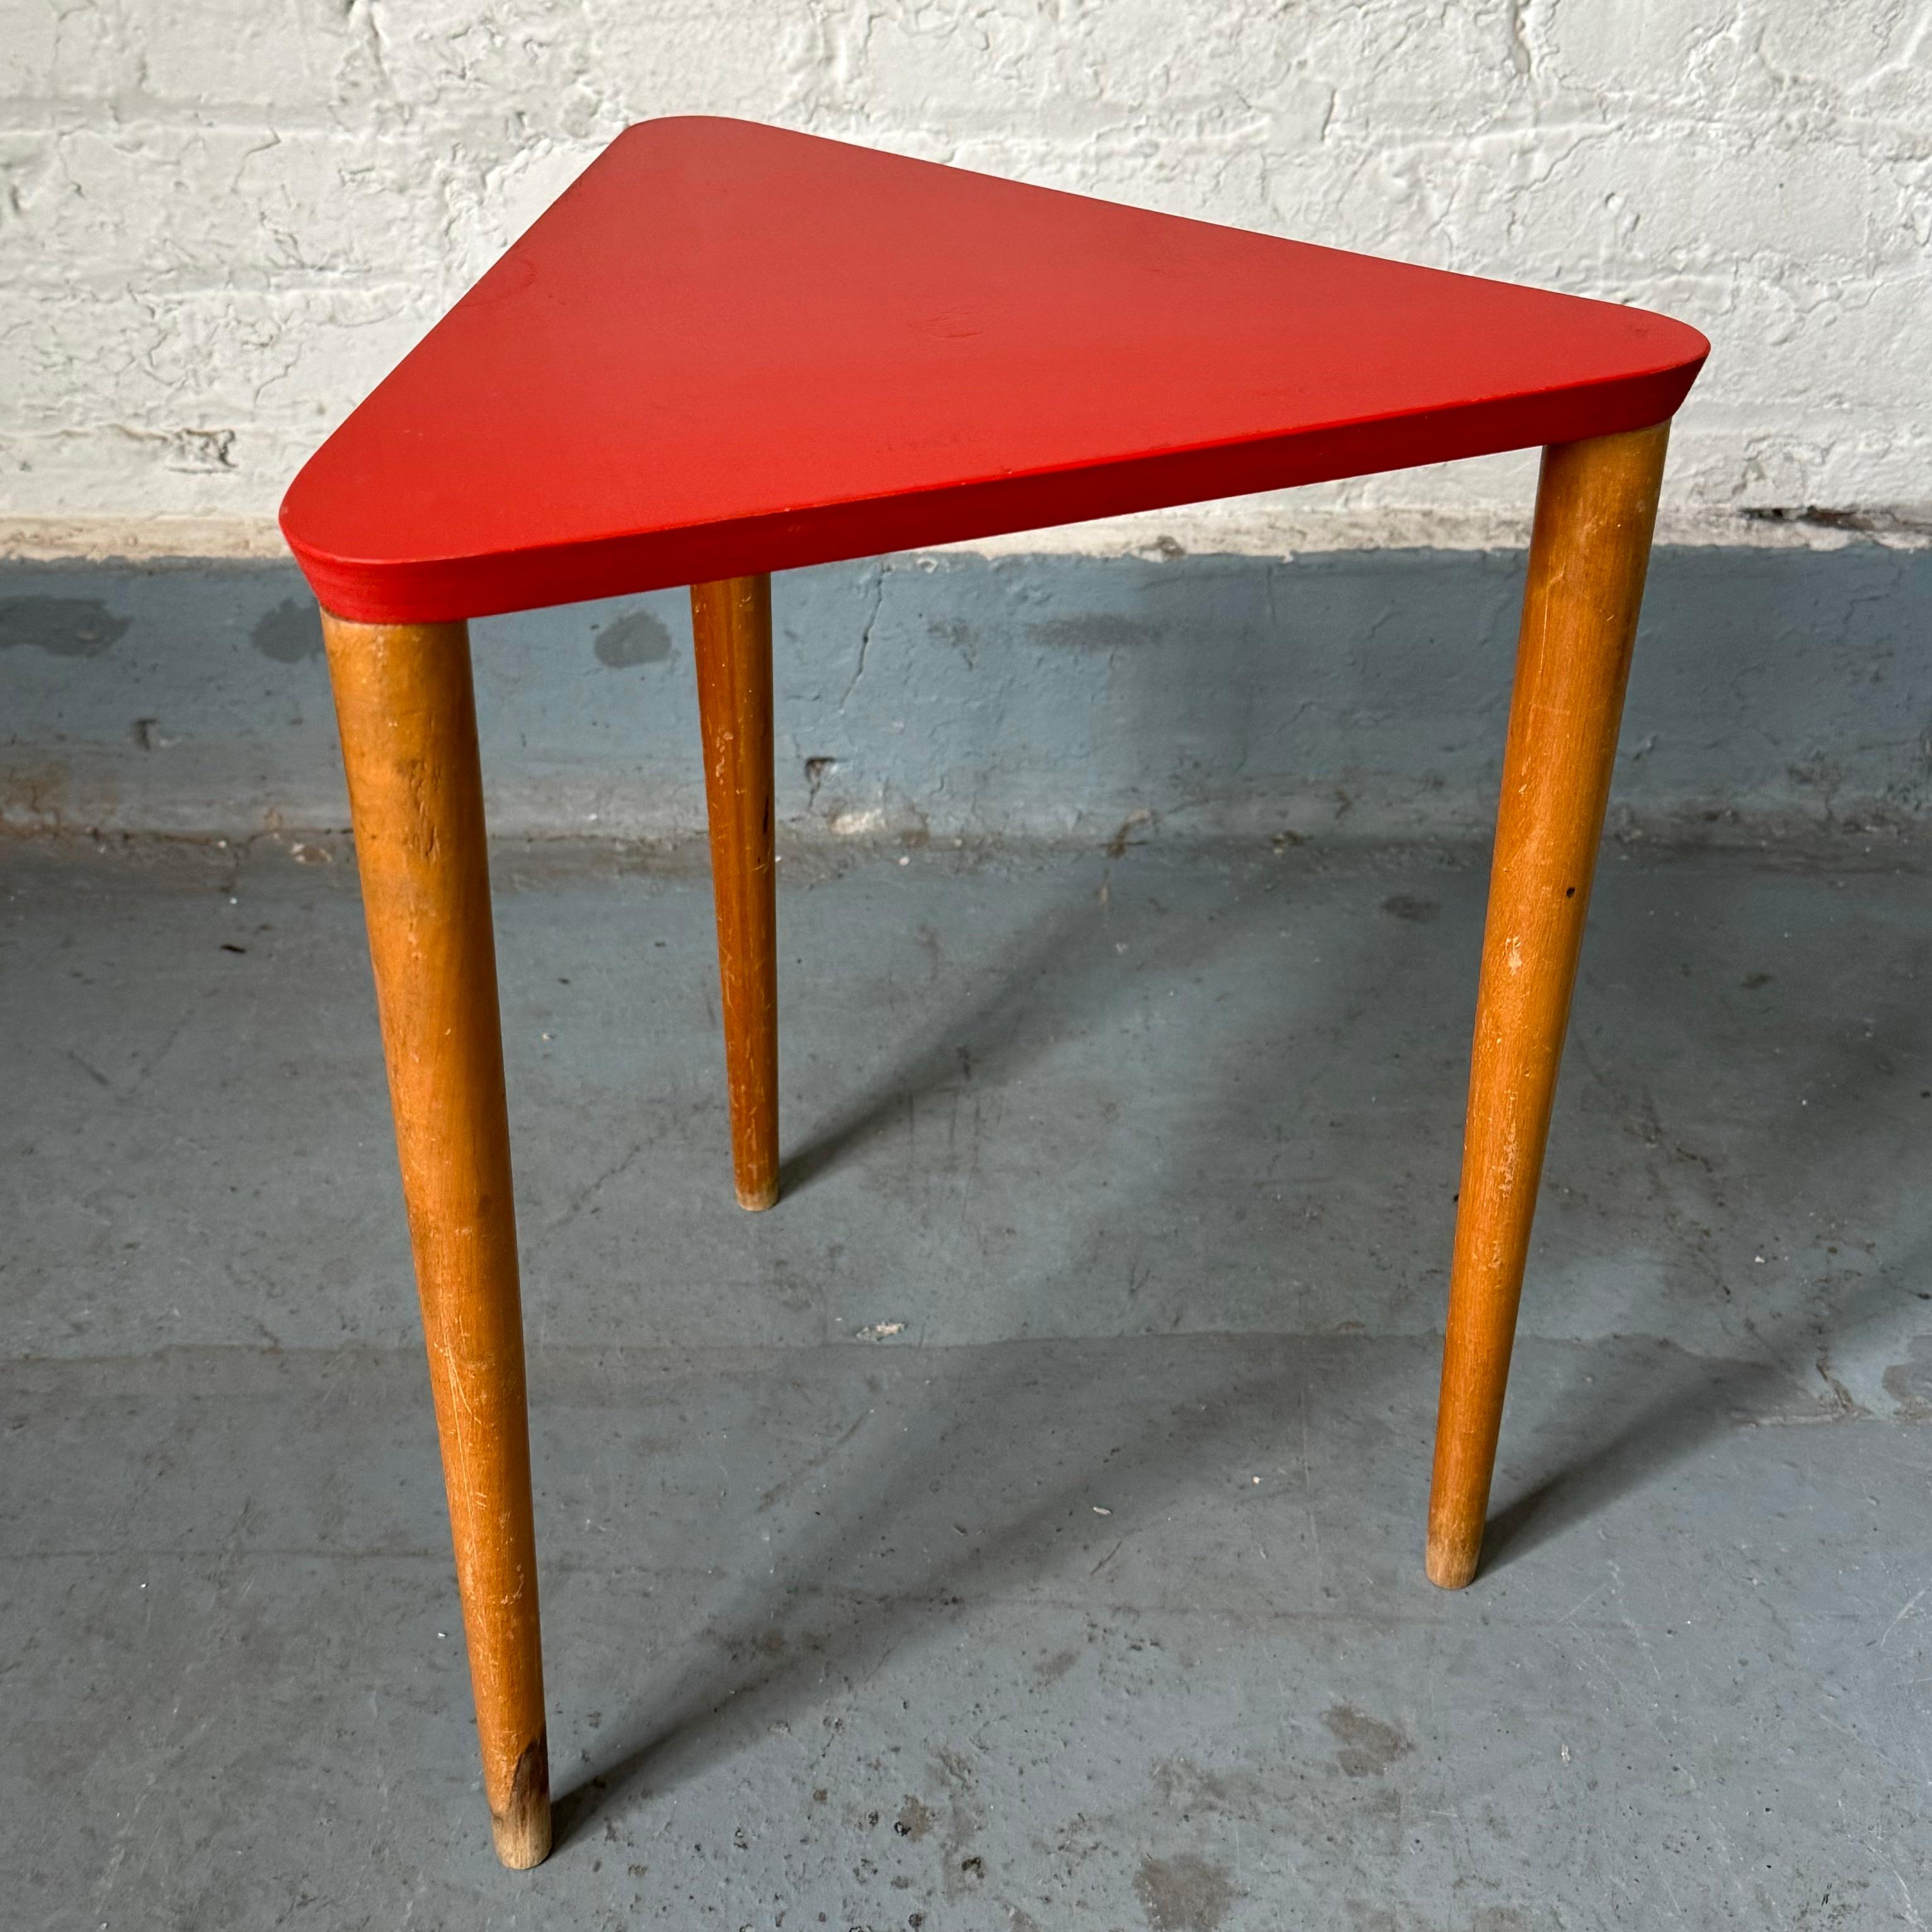 Stacking side table (or stool) with a triangular lacquered plywood top and solid birch dowel legs. Designed by Boston area designer and urban planner Fran Hosken and produced by her eponymous company Hosken, Inc between 1947-1951. Fran’s engineer